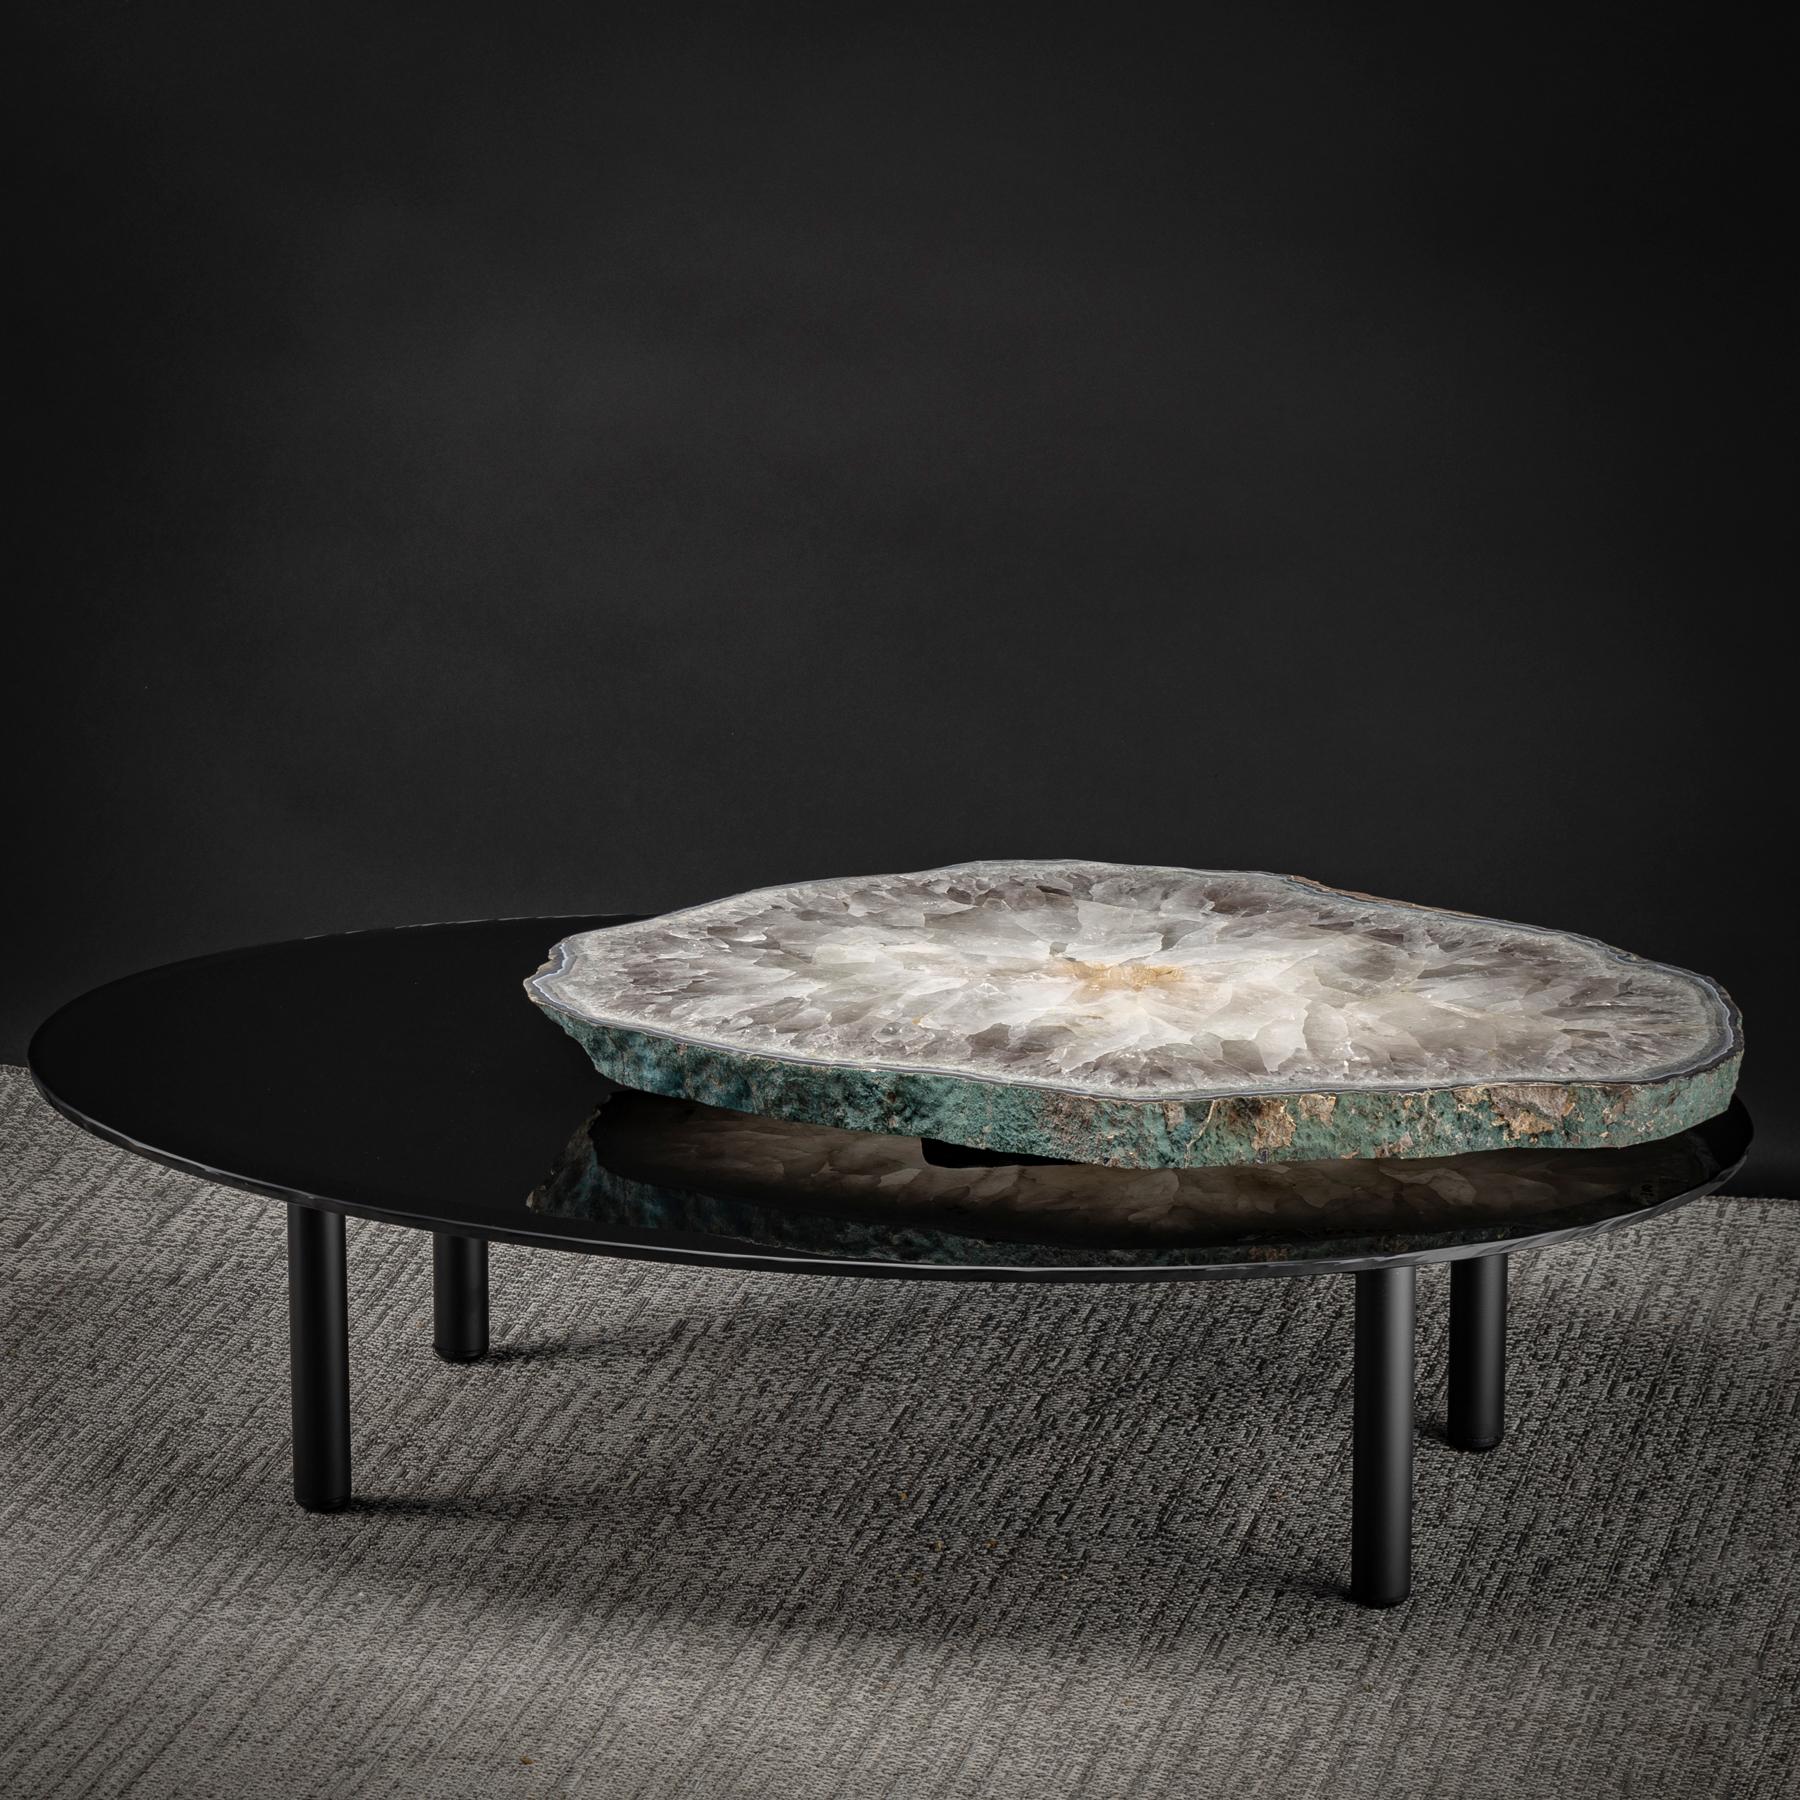 This center table is an original design featuring a 3-way rotating Brazilian Agate.
Measures: The 3 positions are:
50